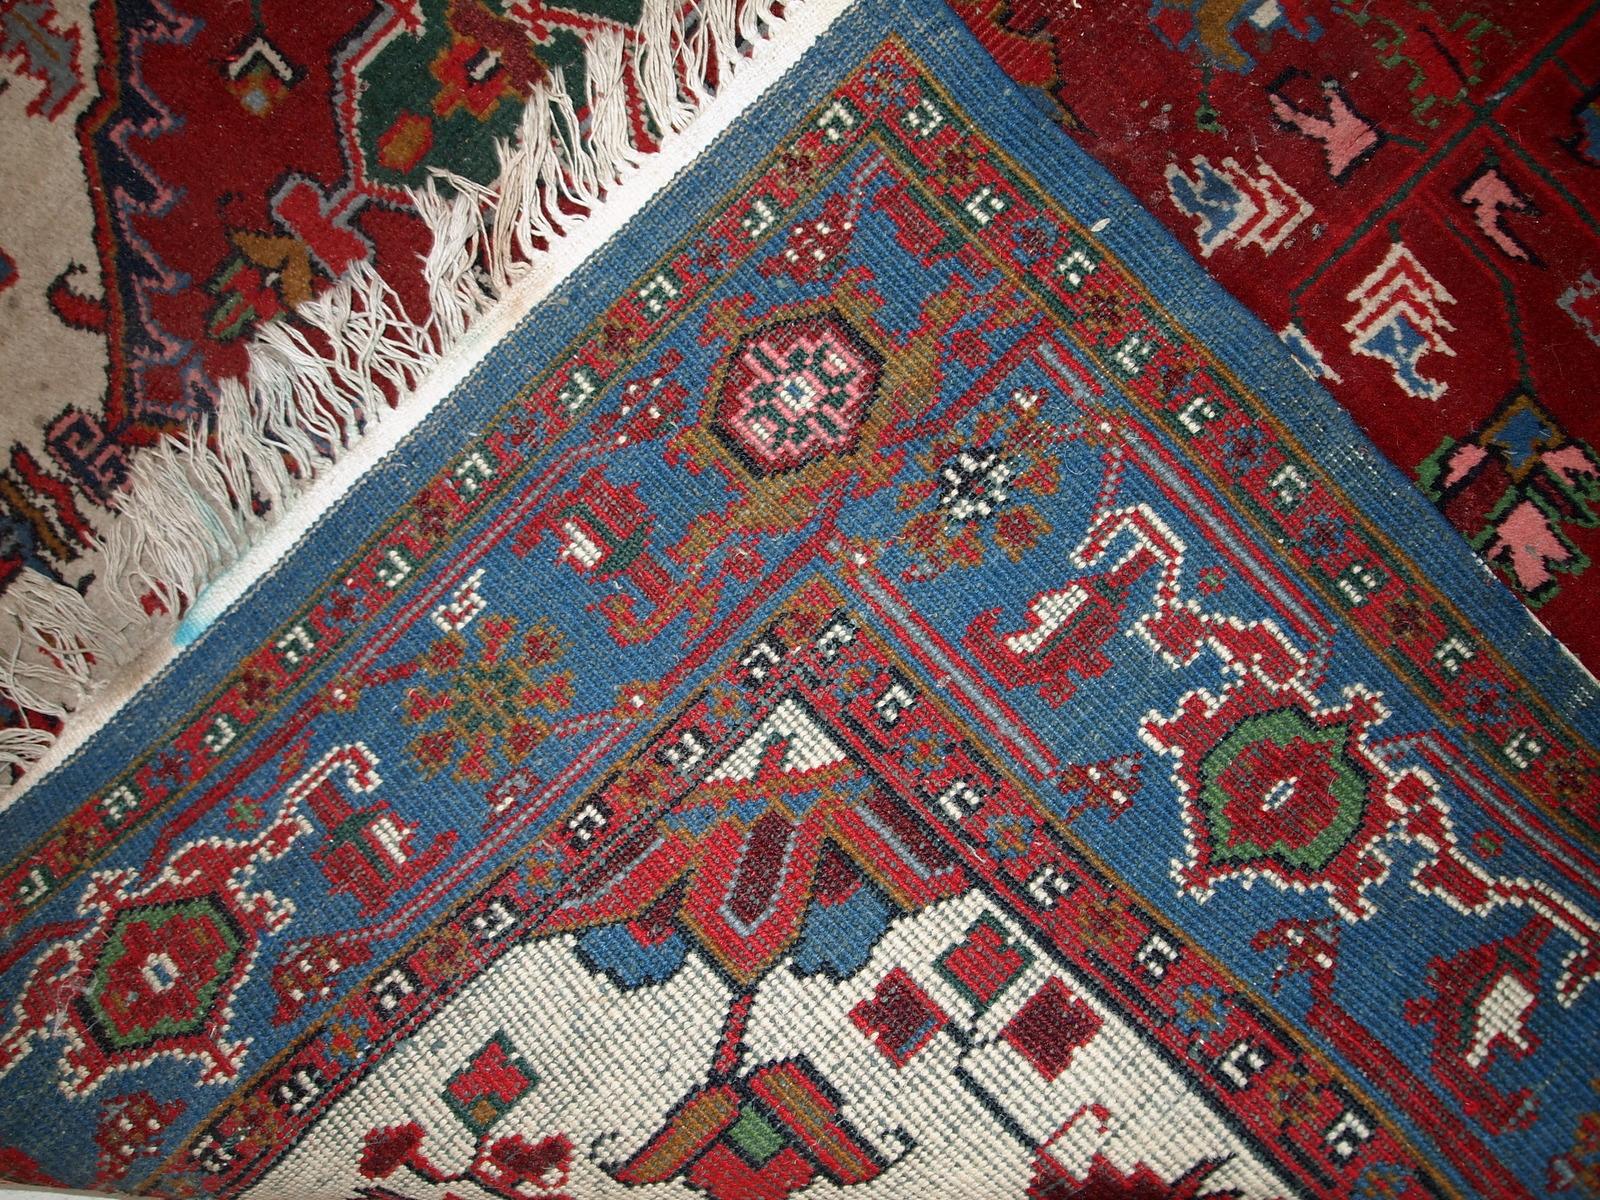 Handmade vintage Heriz rug in original condition, it has some low pile. The rug is from the middle of 20th century made in wool.

- Condition: Original, some low pile,

- circa 1960s,

- Size: 6.6' x 9.8' (202cm x 298cm),

- Material: